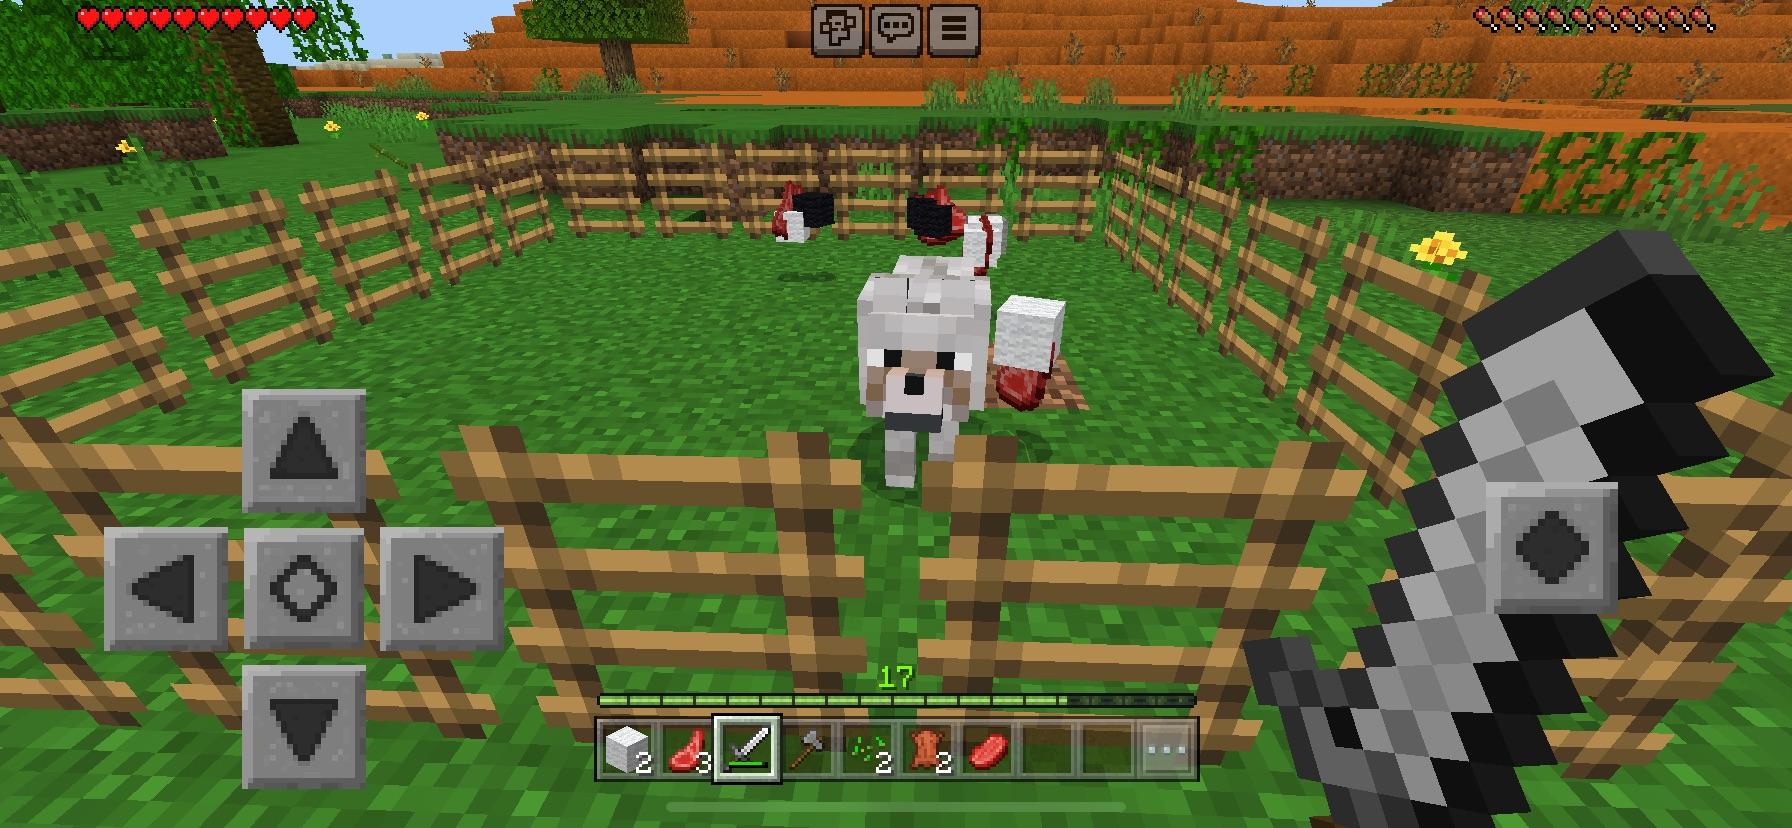 Minecraft Memes - "Can dogs/wolves really jump fences in Minecraft?"